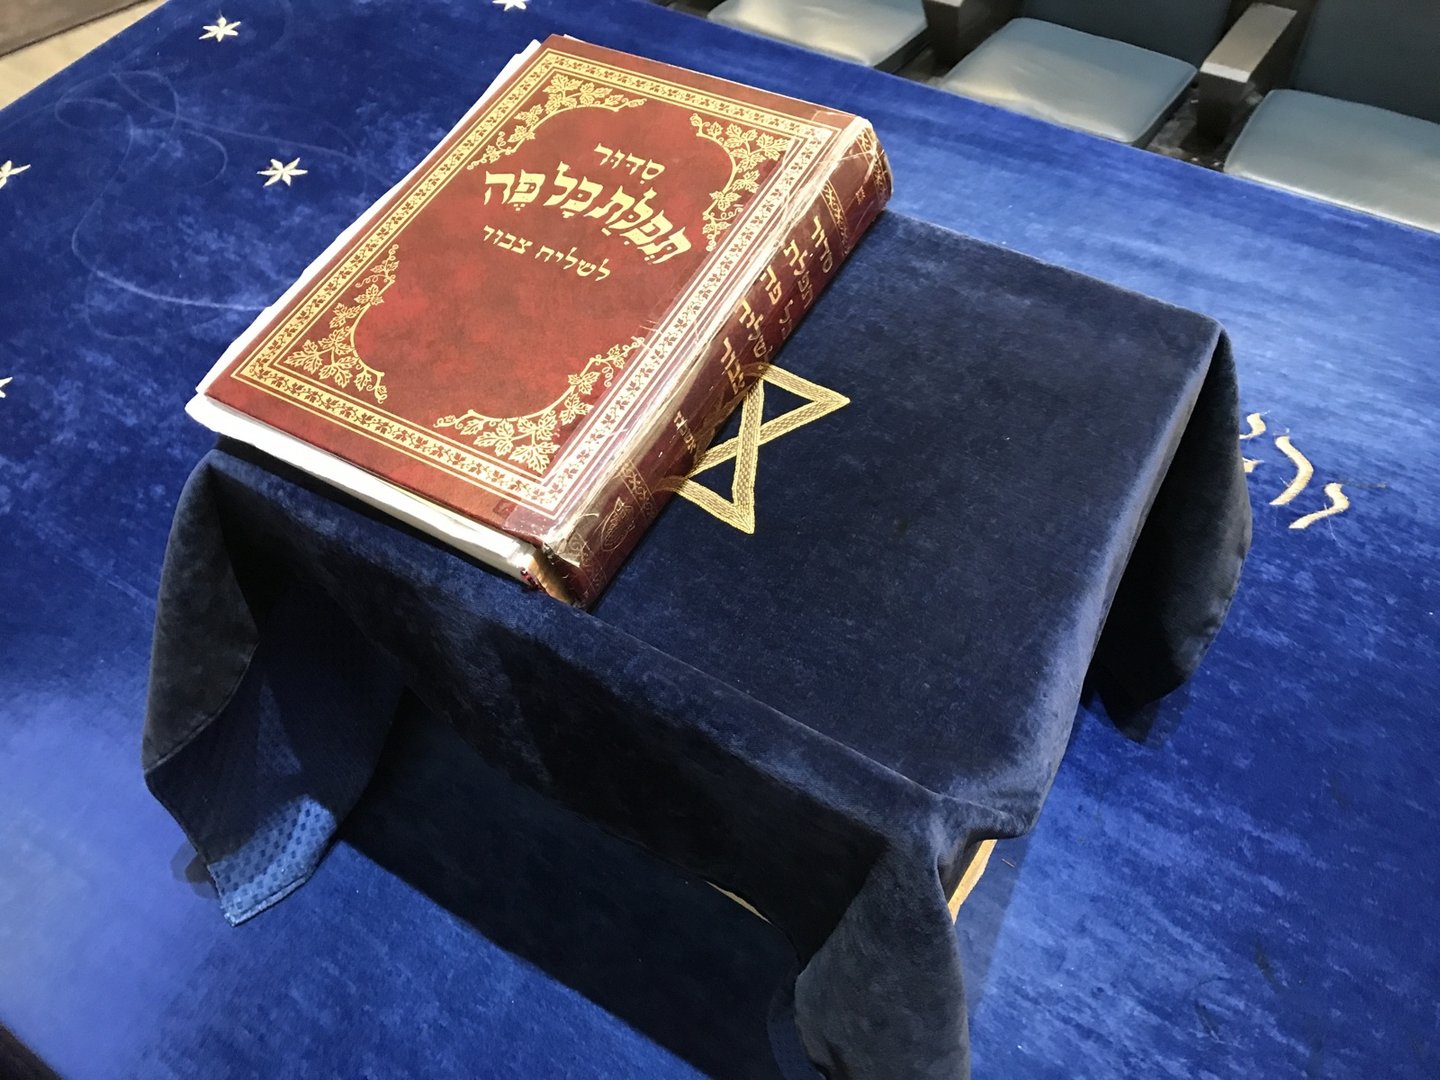 Brown book with golden lettering on a blue velvet ground